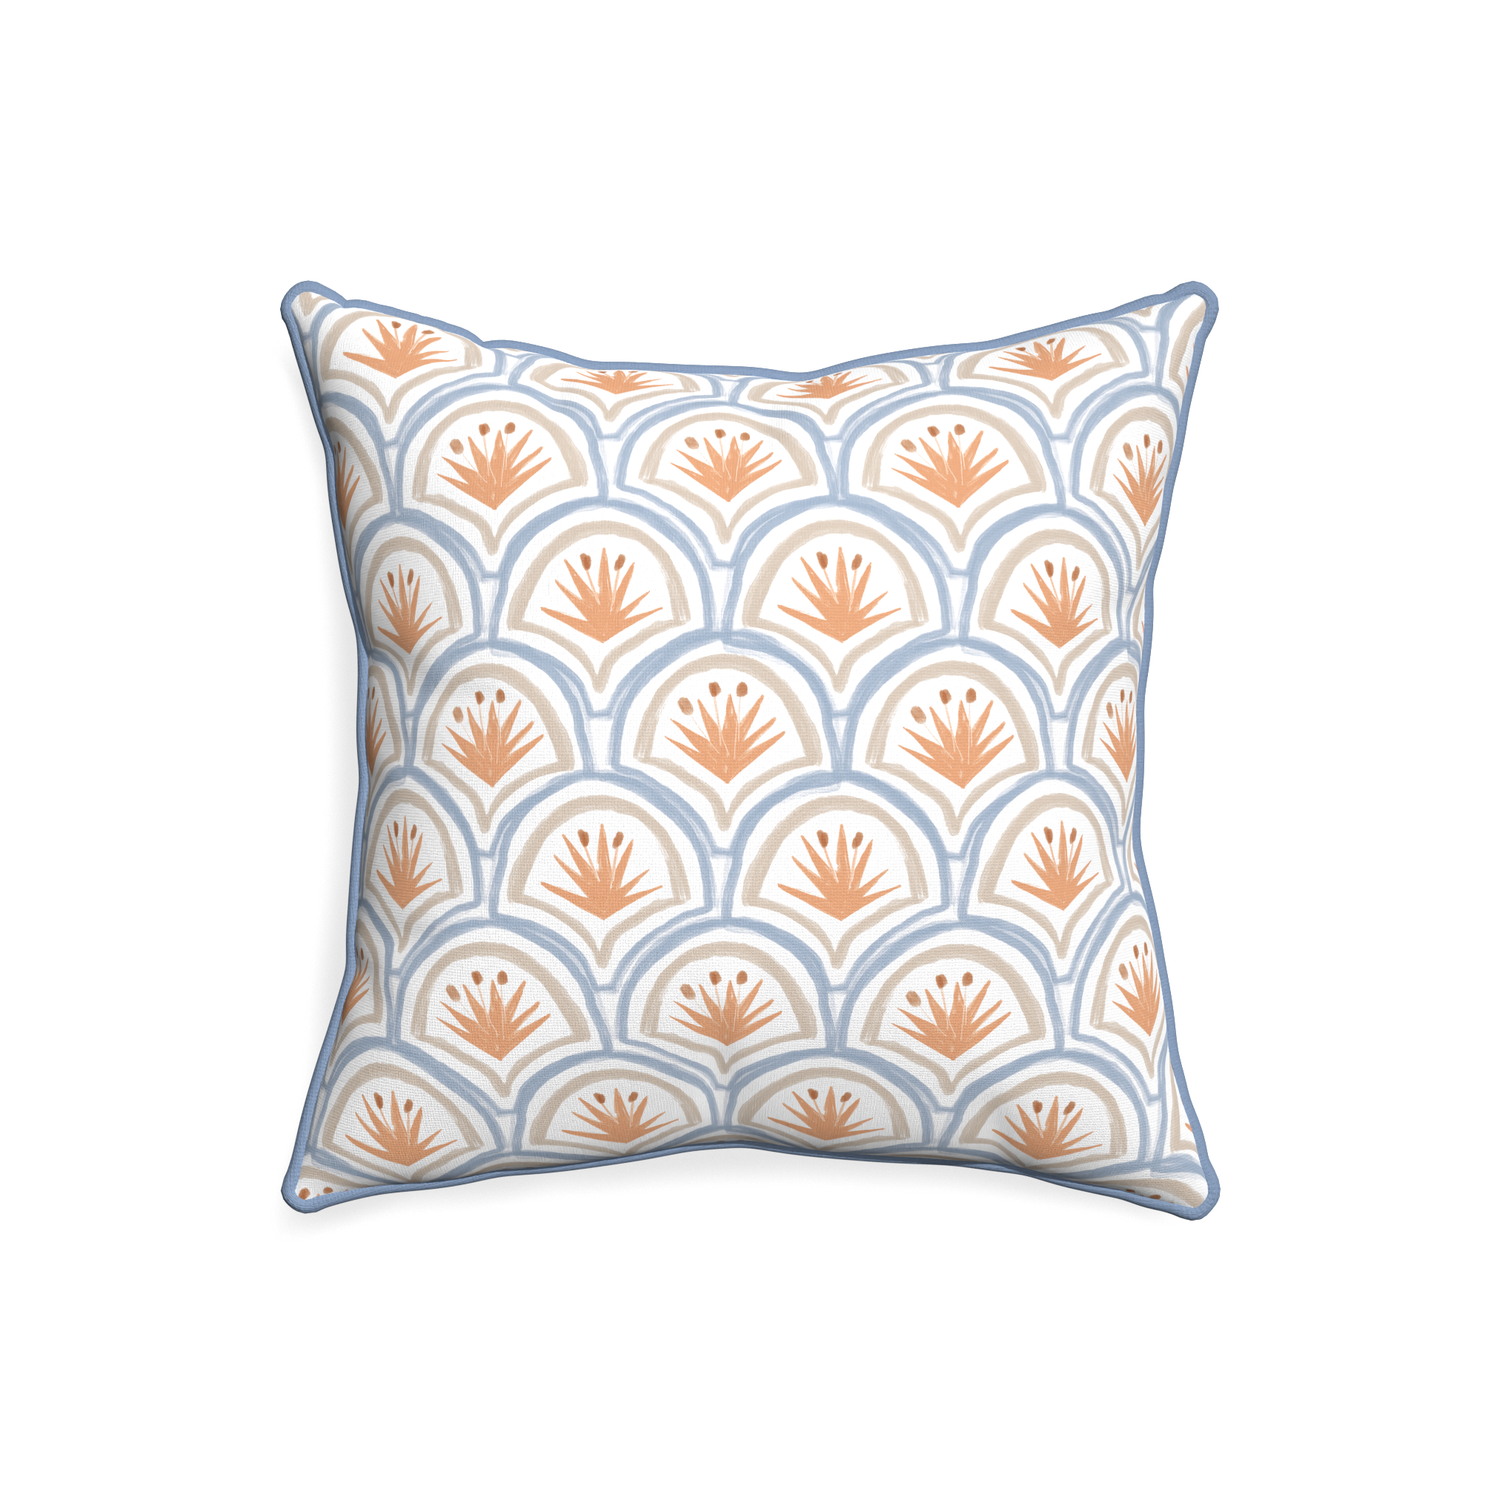 20-square thatcher apricot custom pillow with sky piping on white background